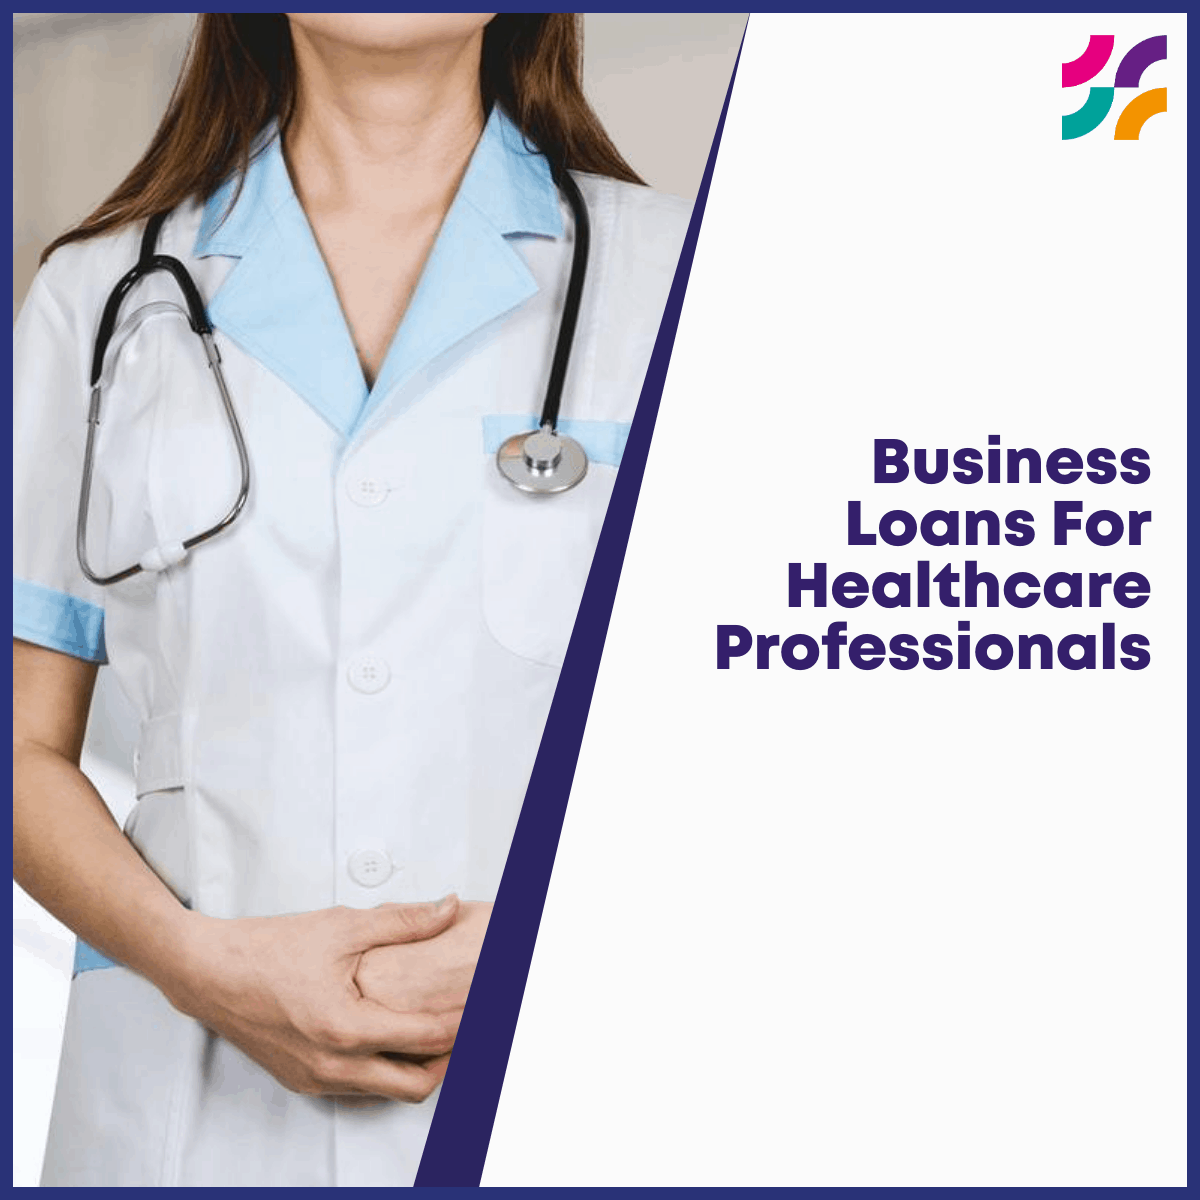 Business Loans For Healthcare Professionals